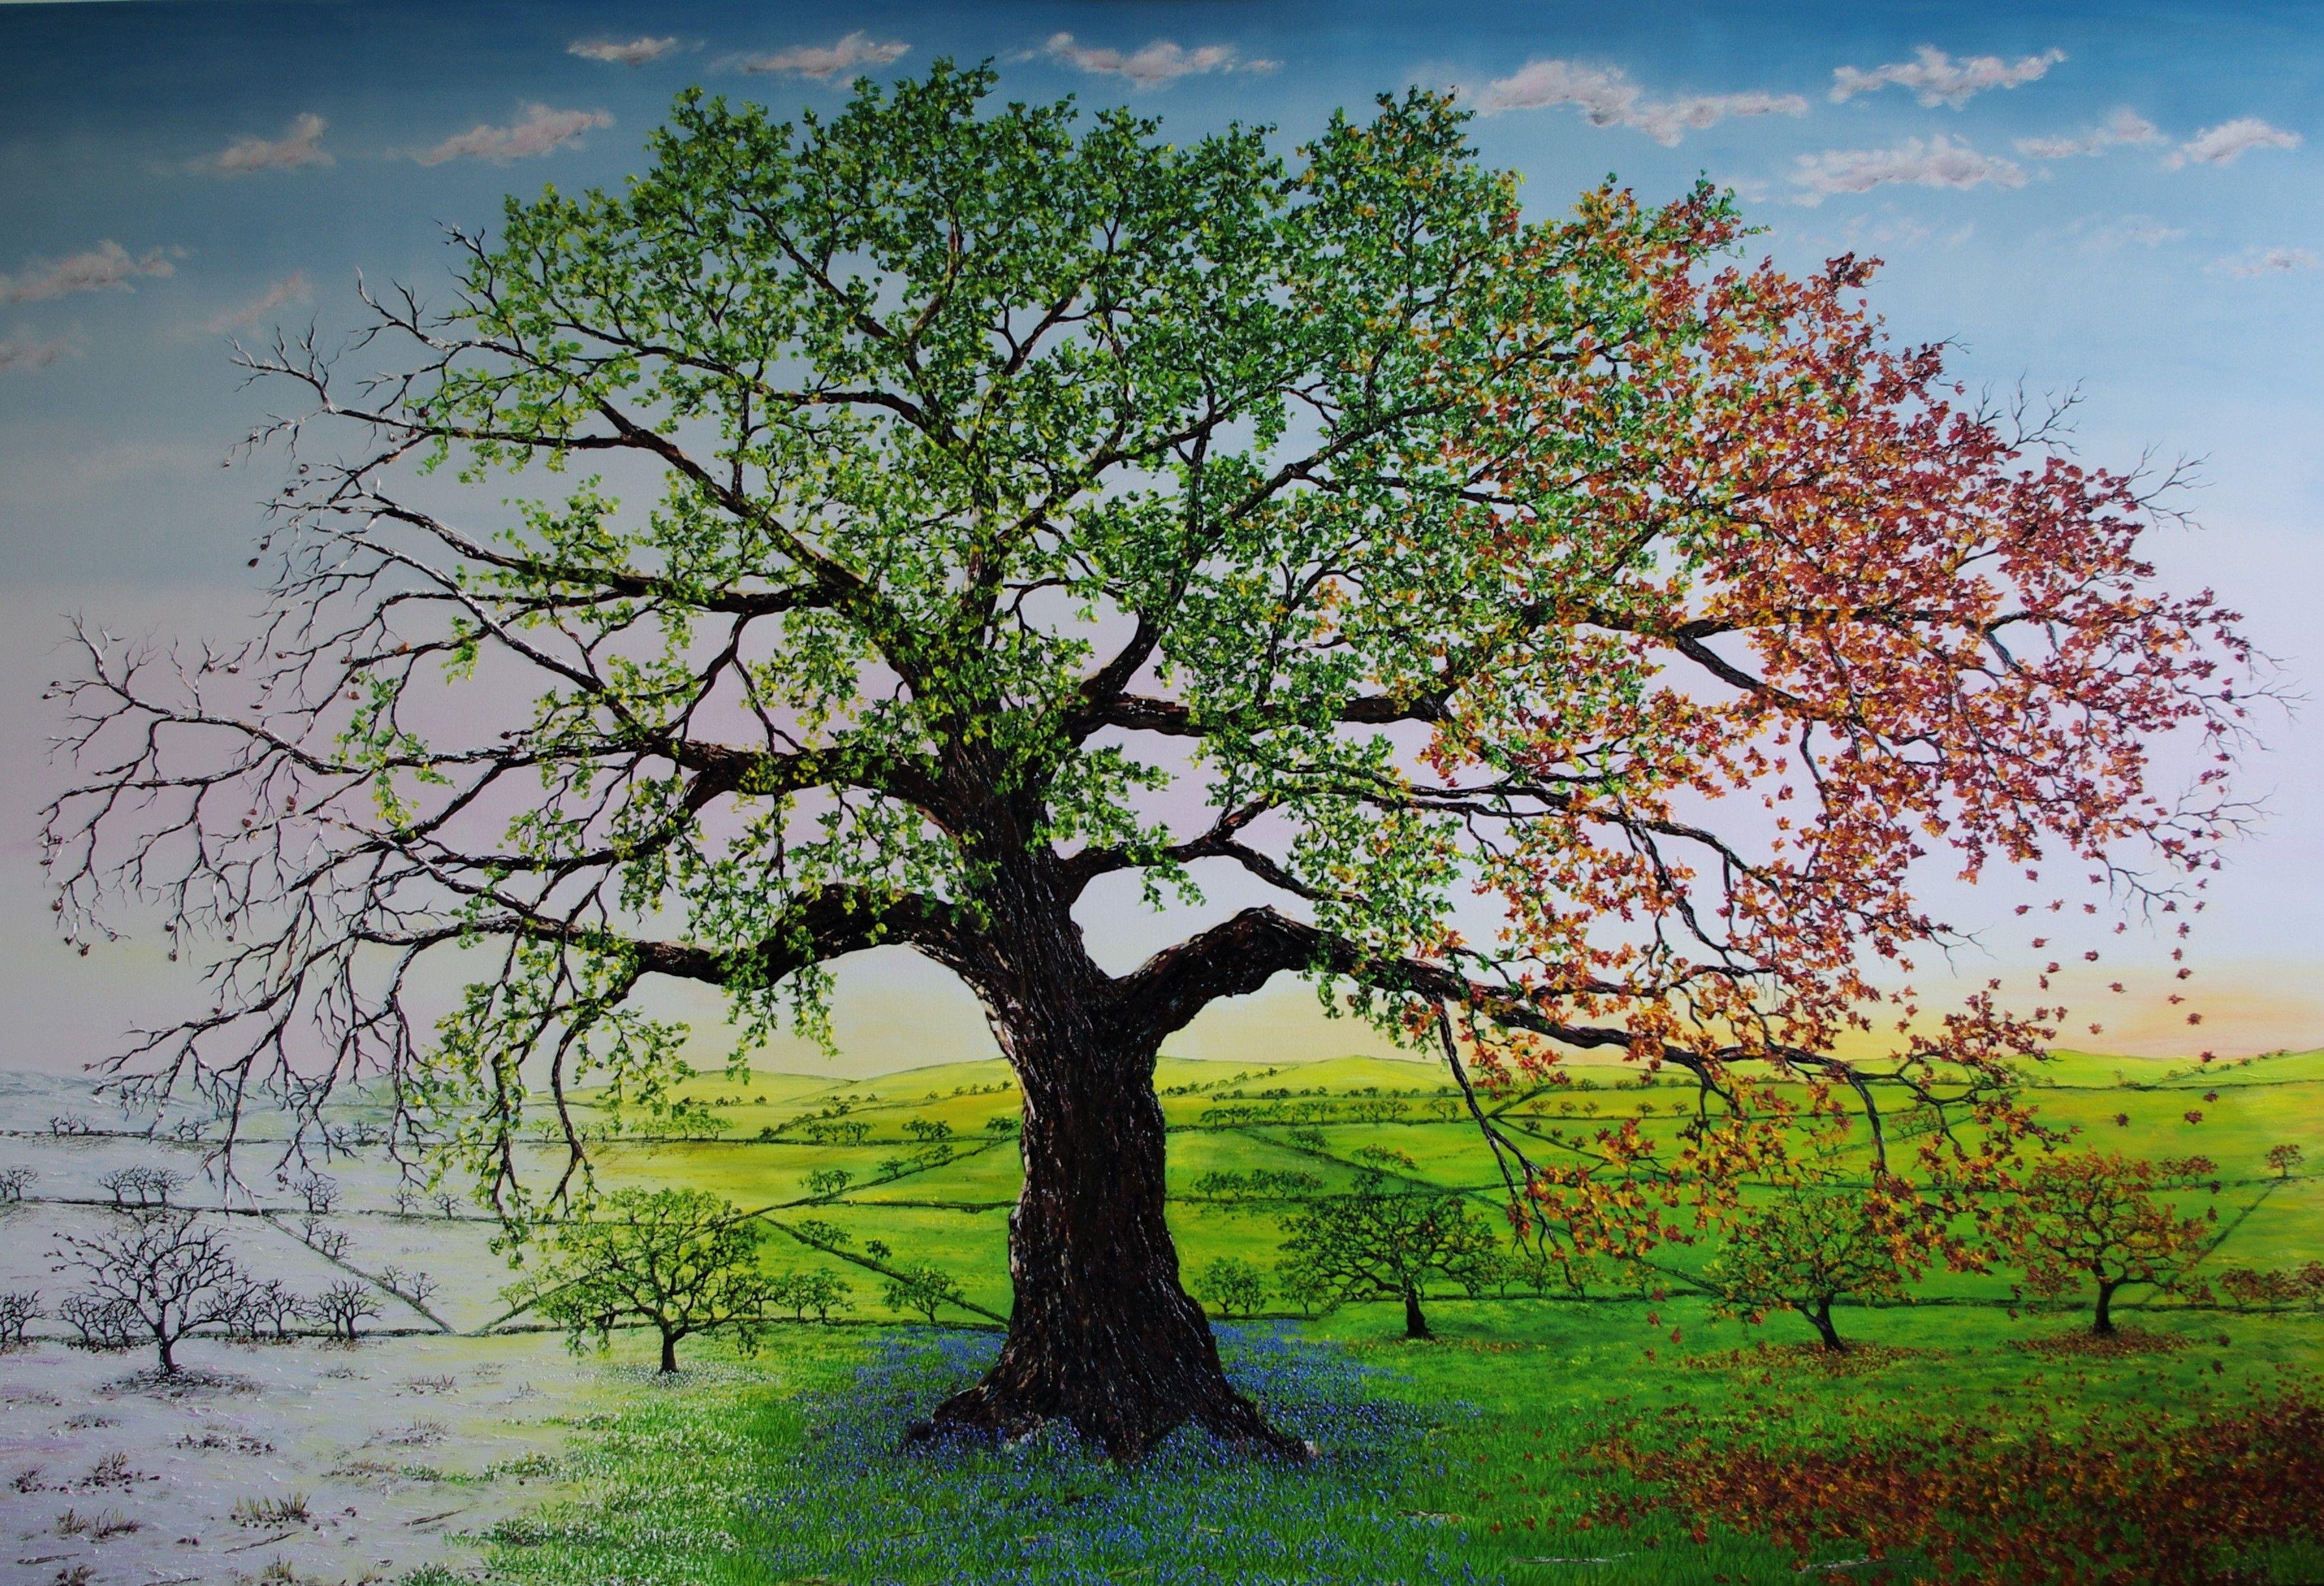 Extra large textured oil painting of an oak tree in all 4 seasons.  This painting was completed in public at the Stockport War Memorial Art Gallery and Museum, where I was artist in residence after winning the Peopleâ€™s choice award there in 2019